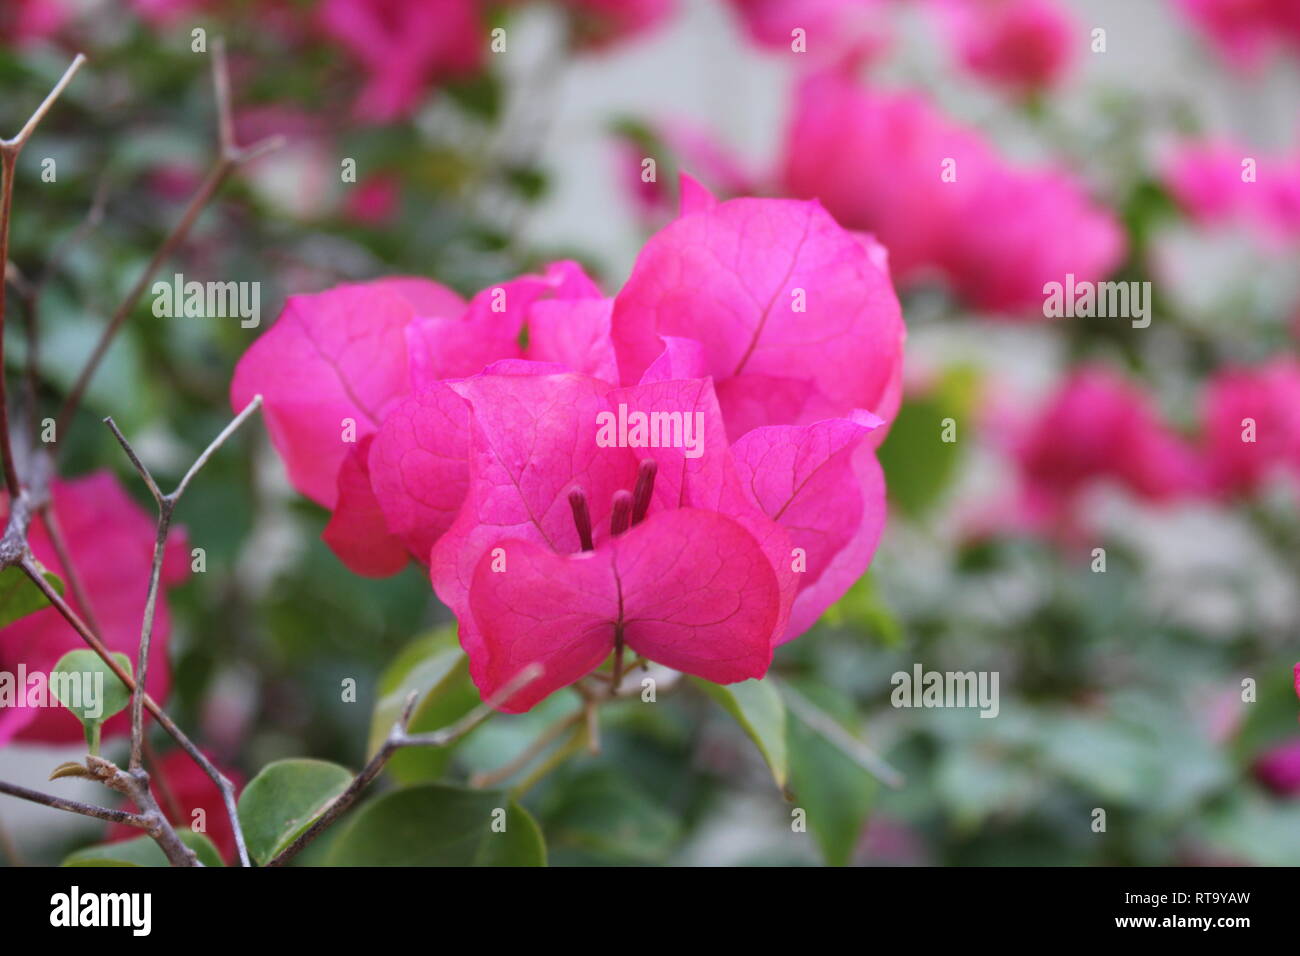 Beautiful cultivated flowering pink bougainvillea plant growing in the flower garden. Stock Photo